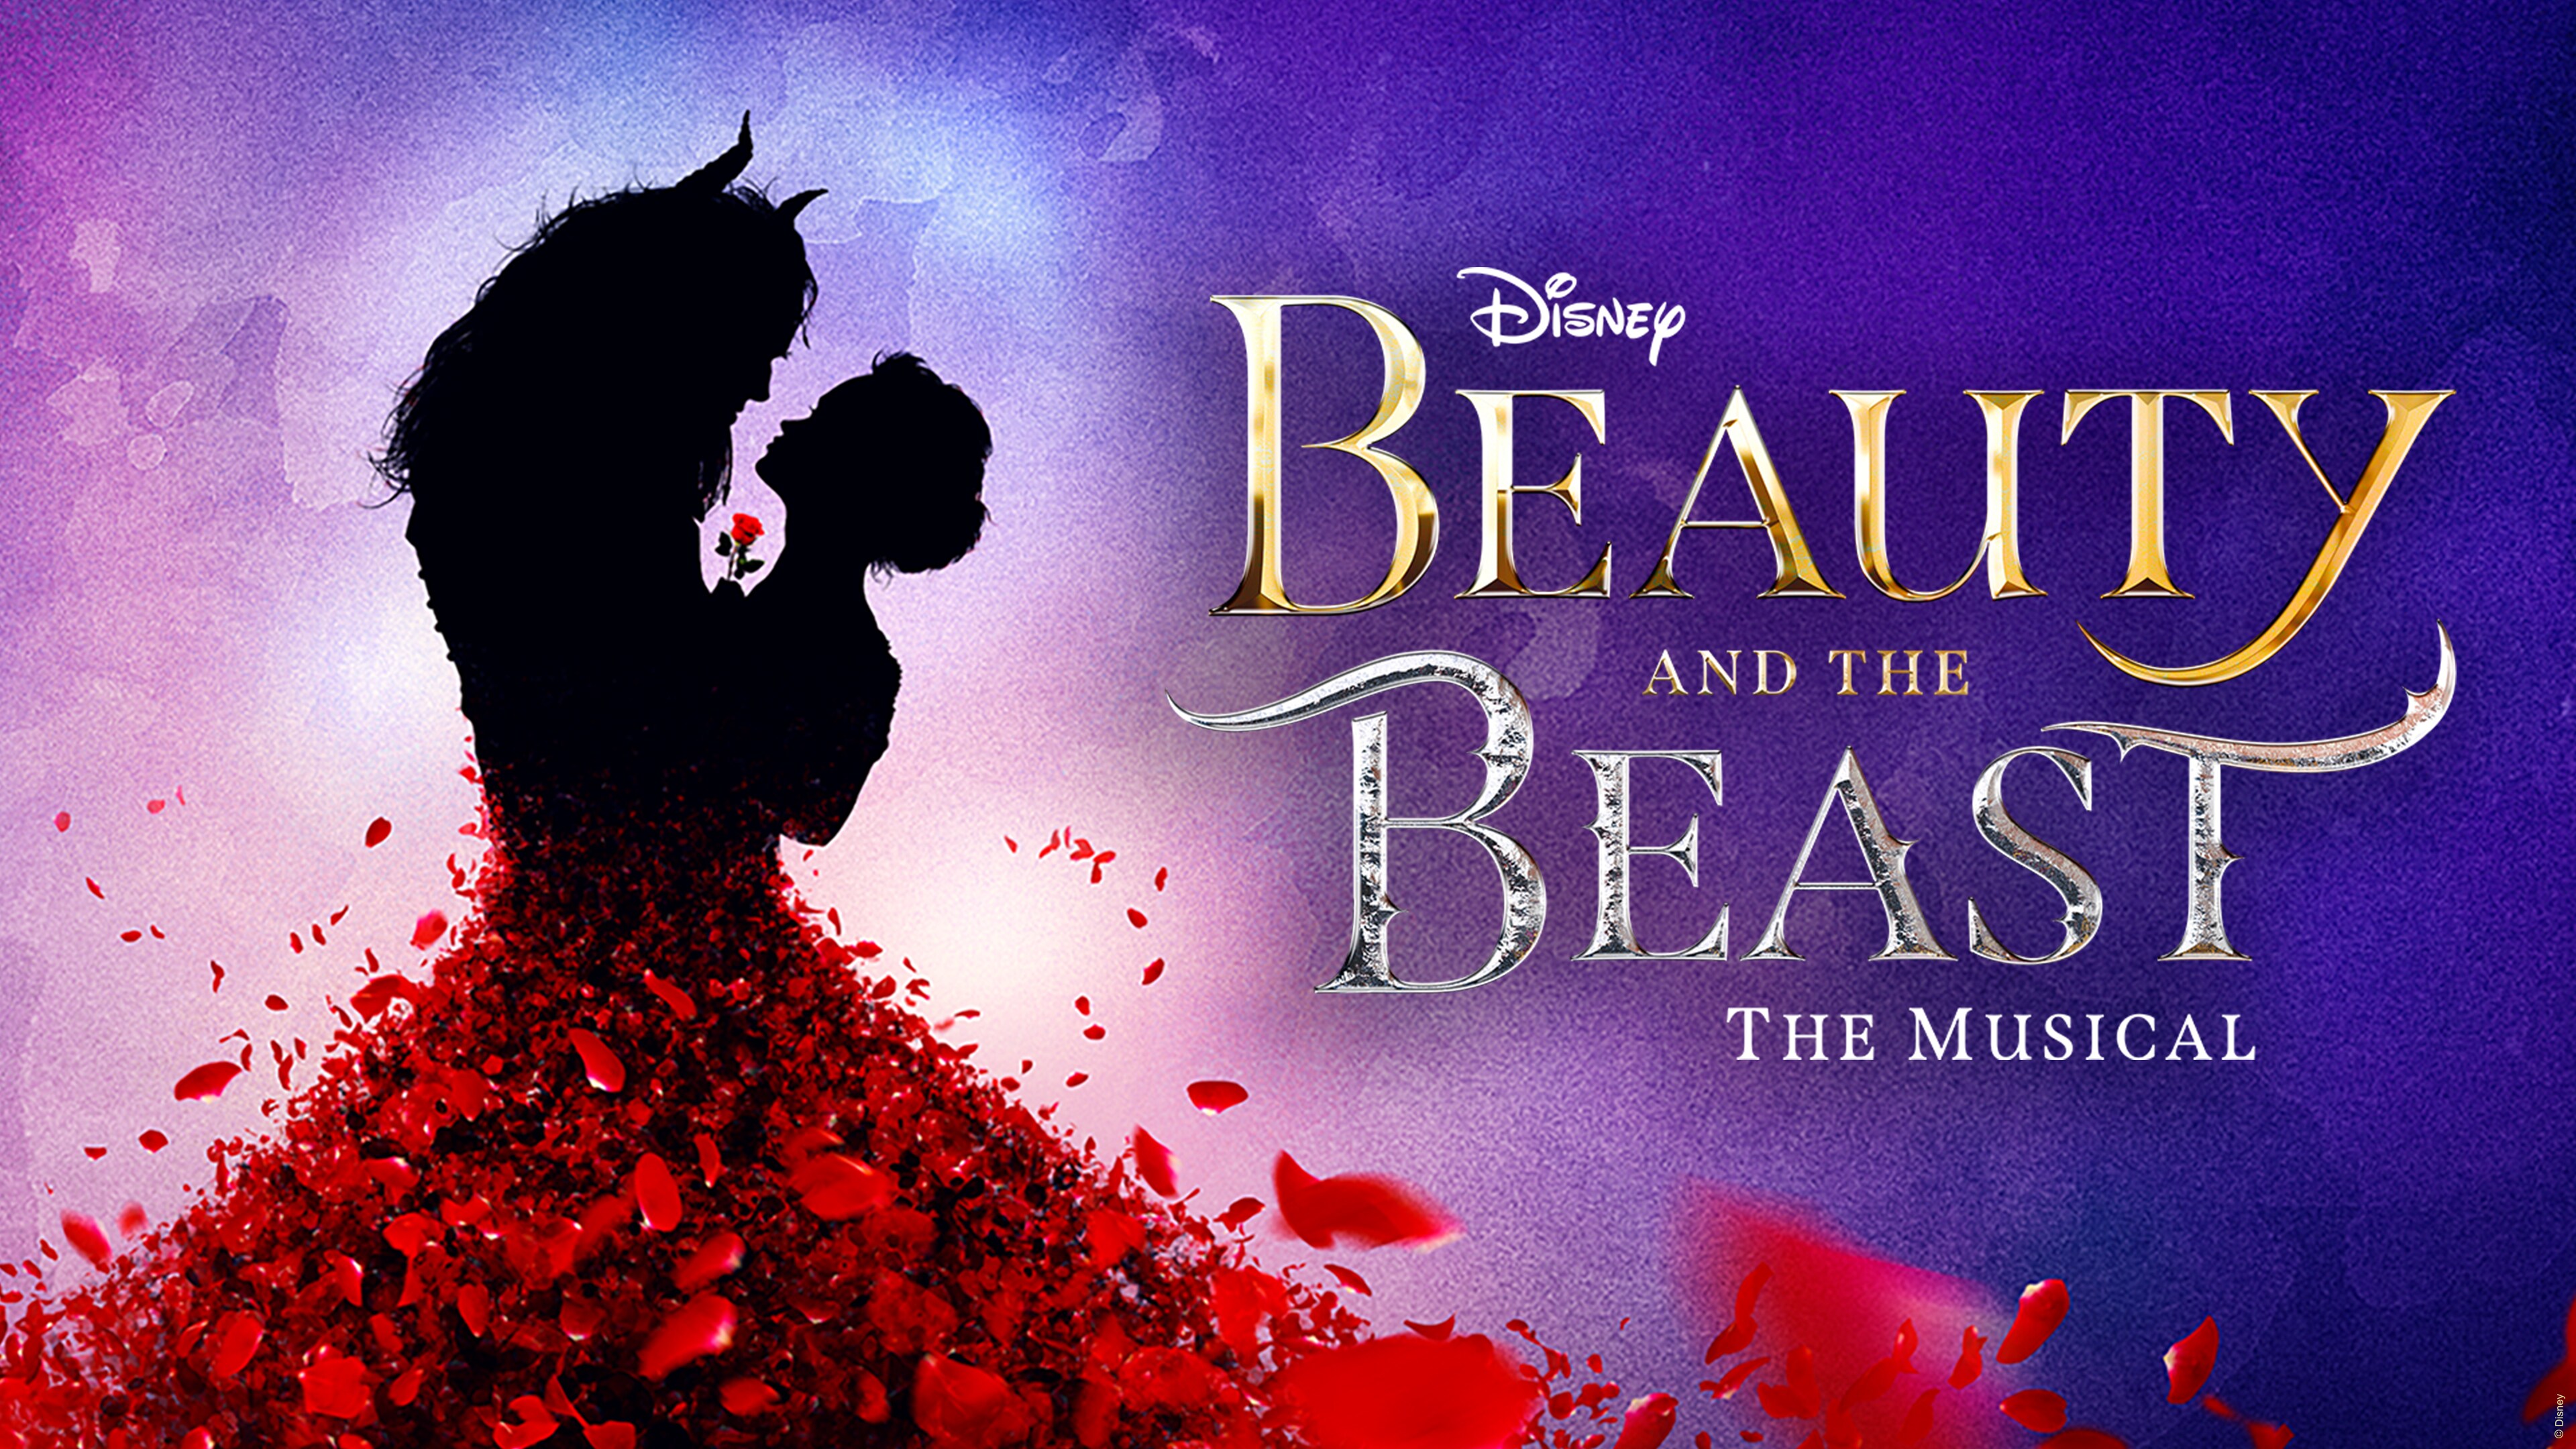 Sydney to host Disney’s new production of ‘Beauty and the Beast’ at the Capitol Theatre in June 2023